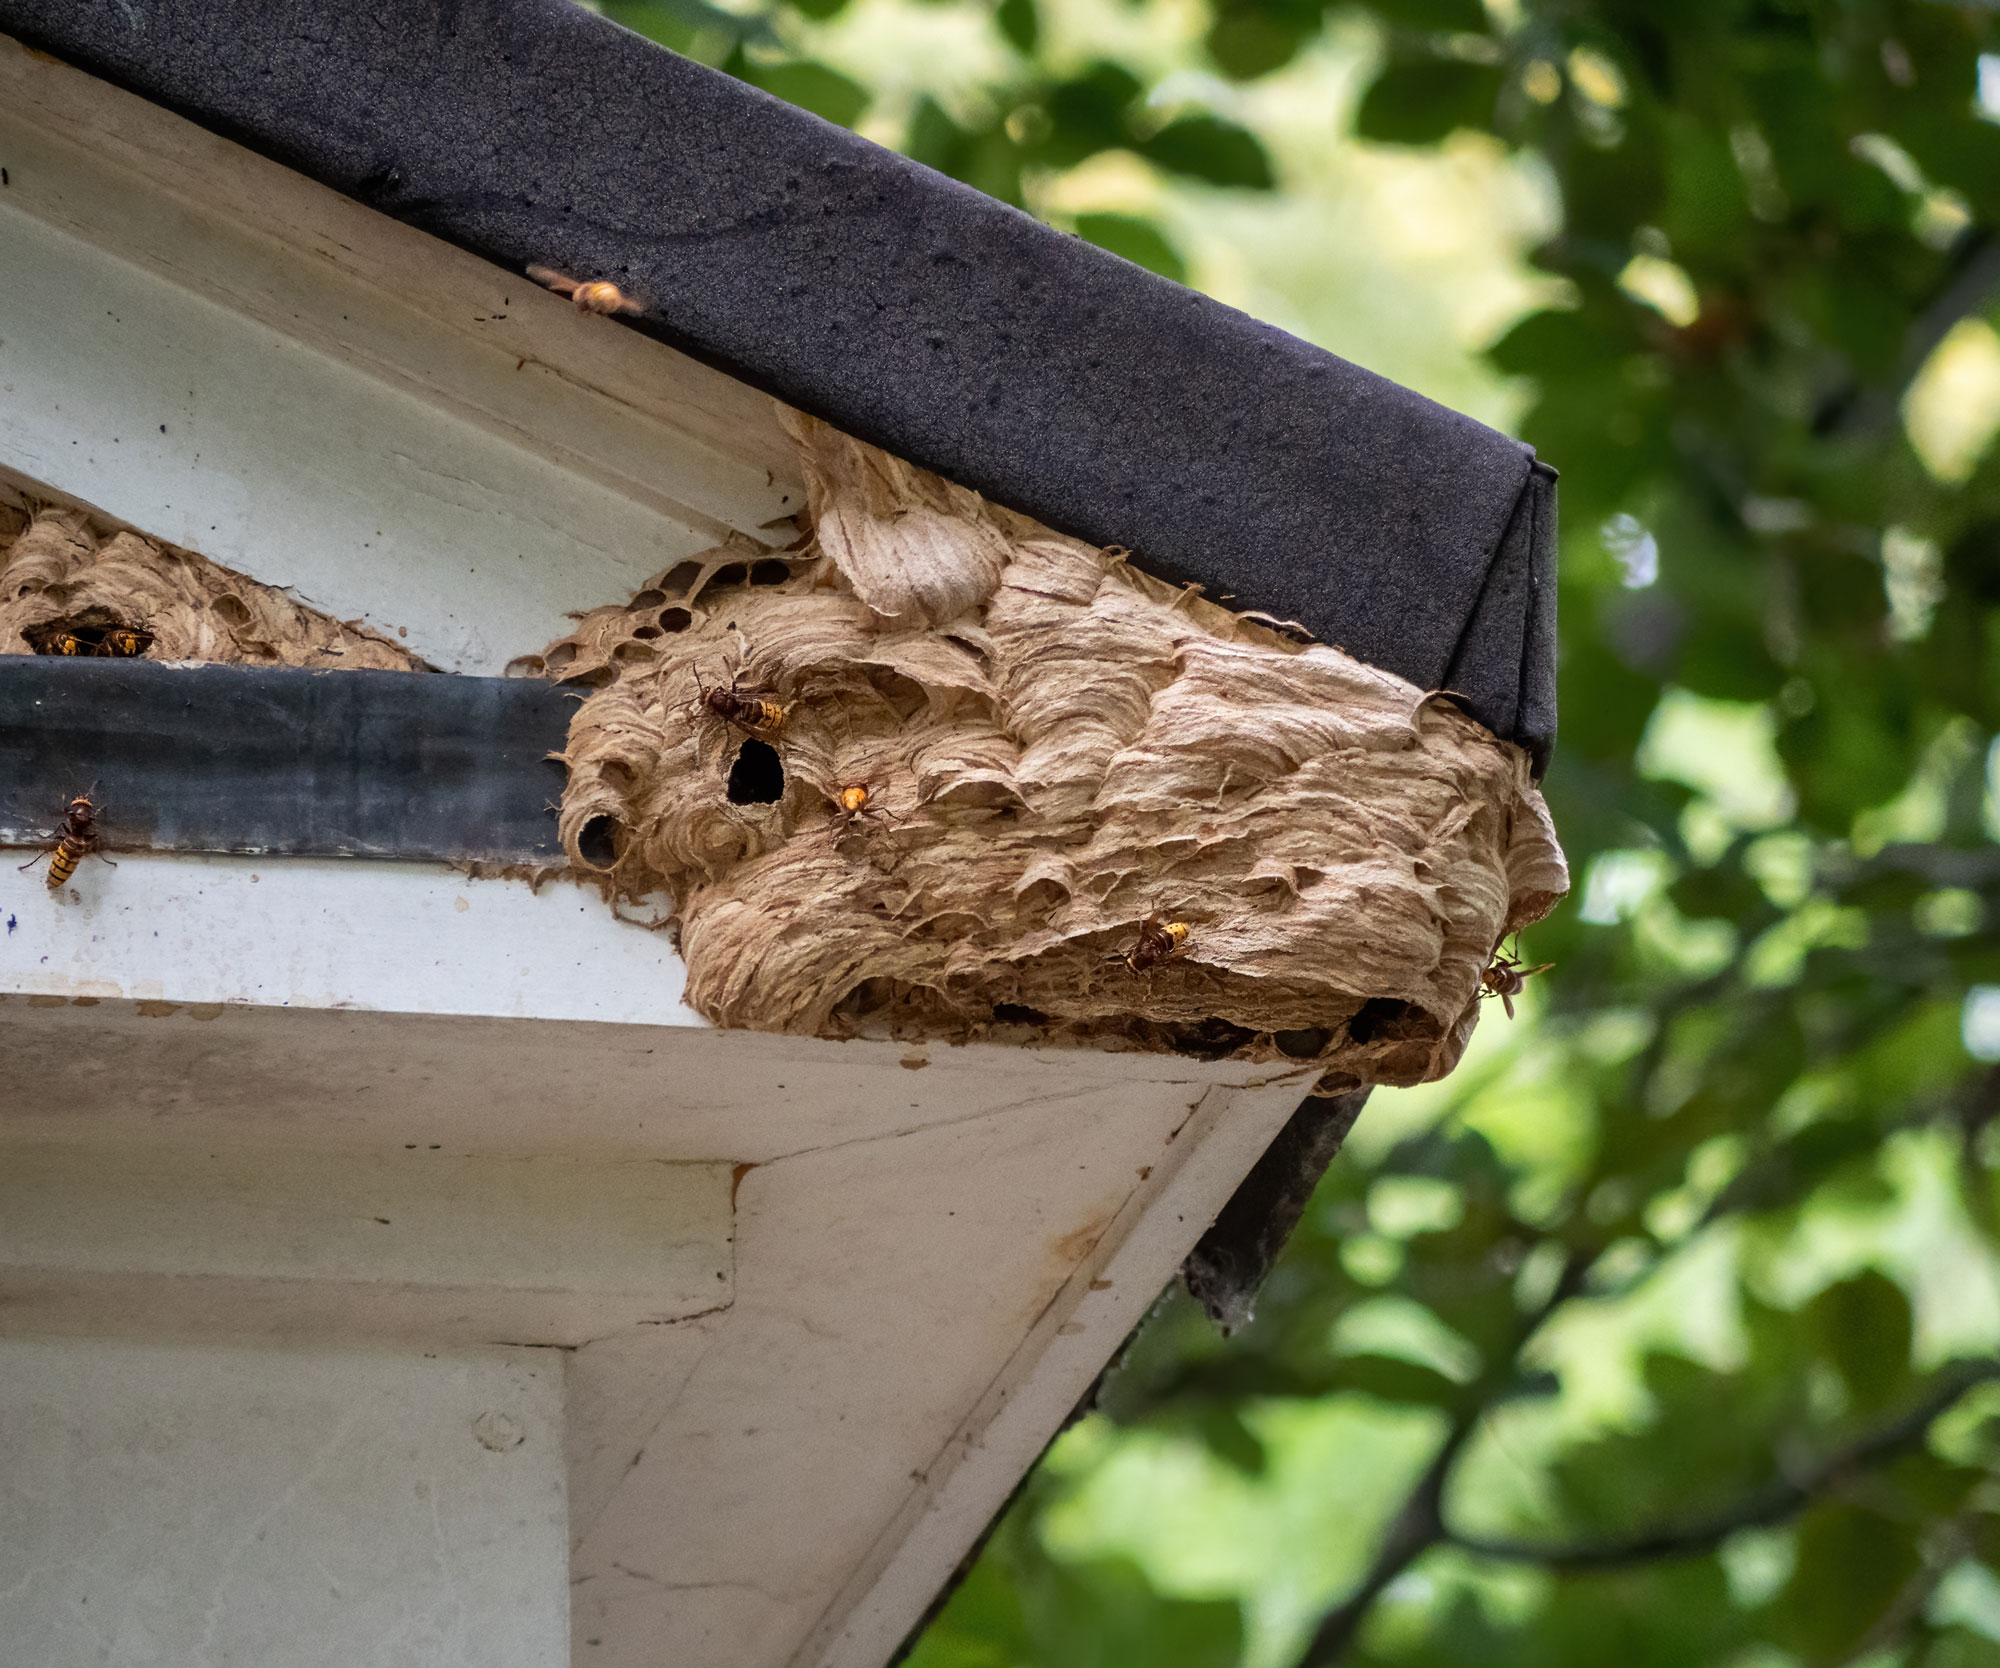 Hornet, bee and wasp control services by Petri Pest Control in South Florida